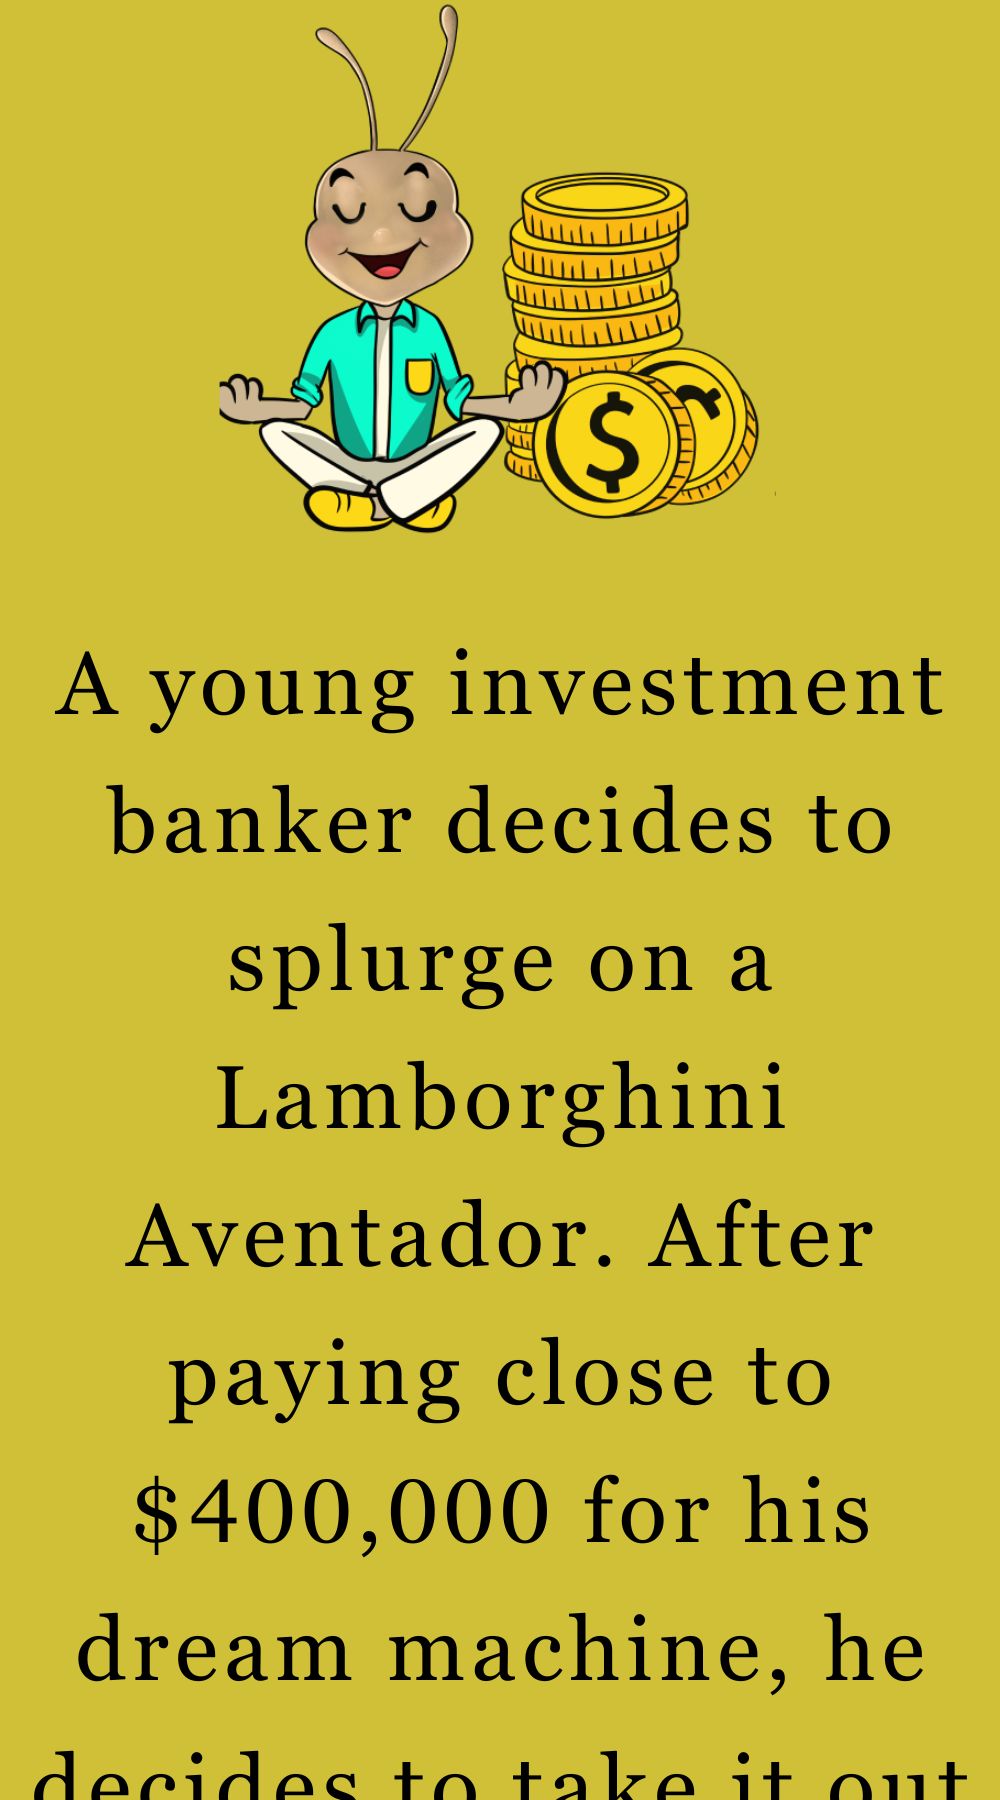 A young investment banker decides to splurge